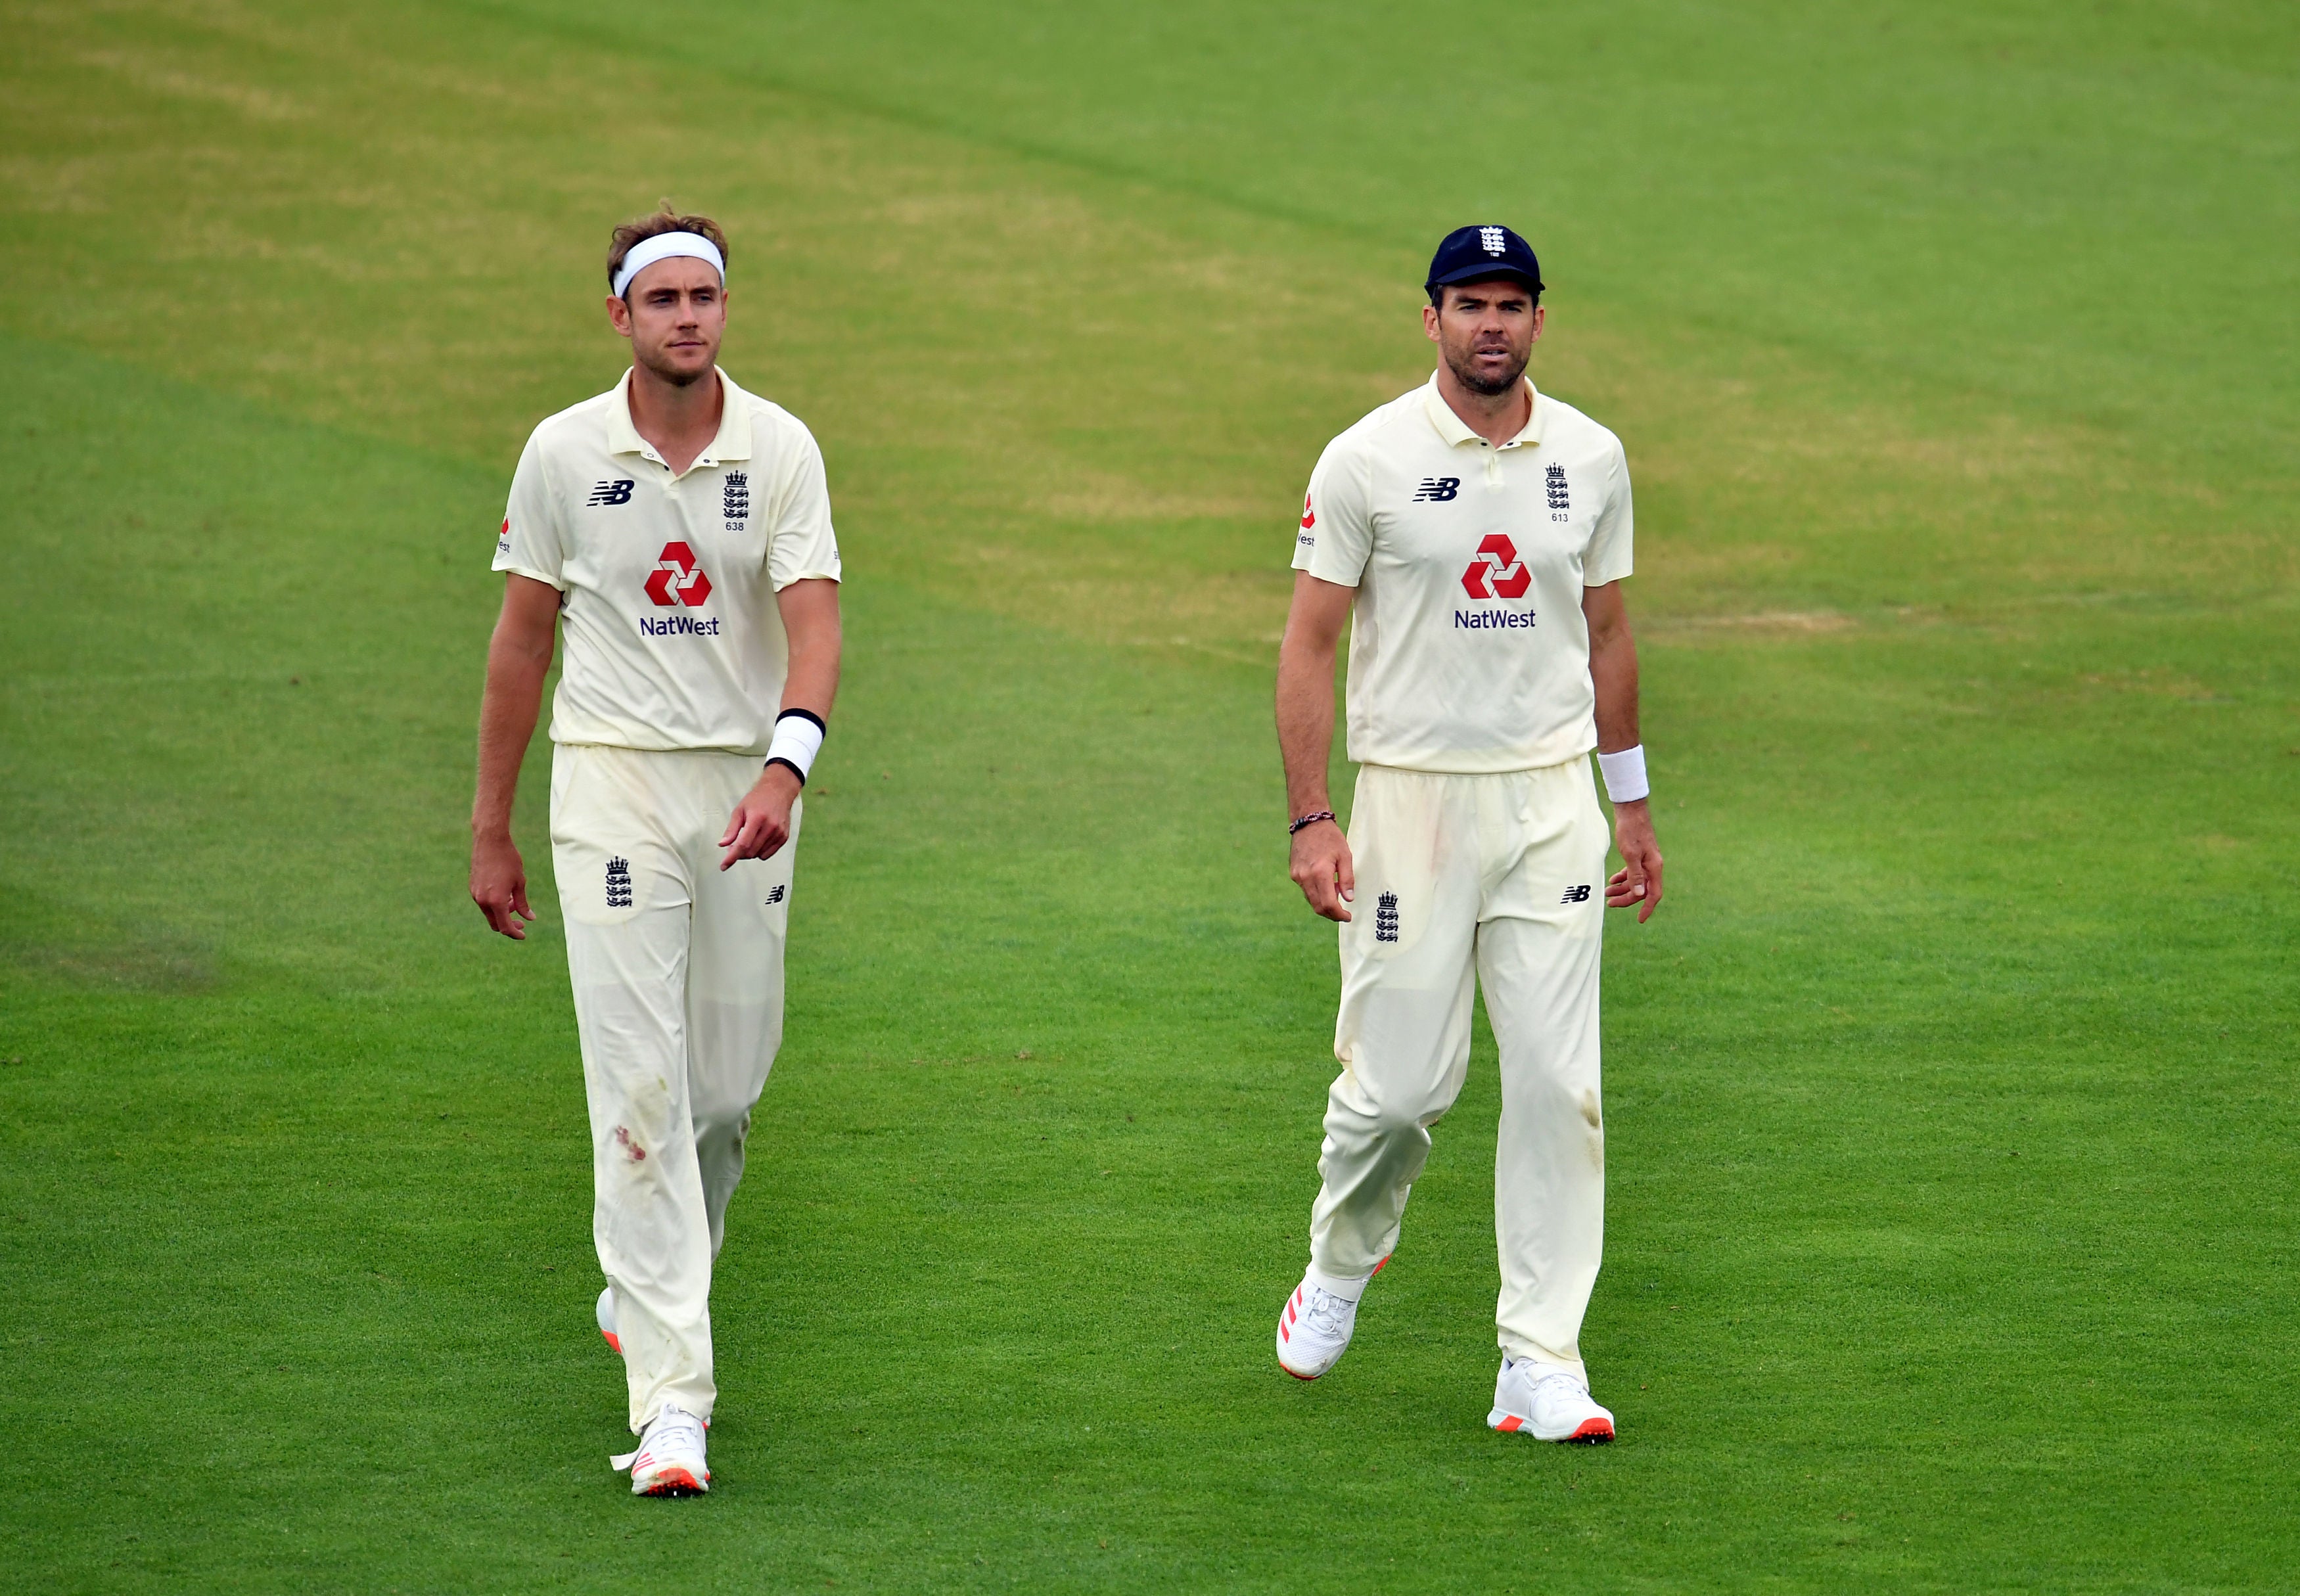 Stuart Broad and James Anderson are England’s two leading wicket-takers